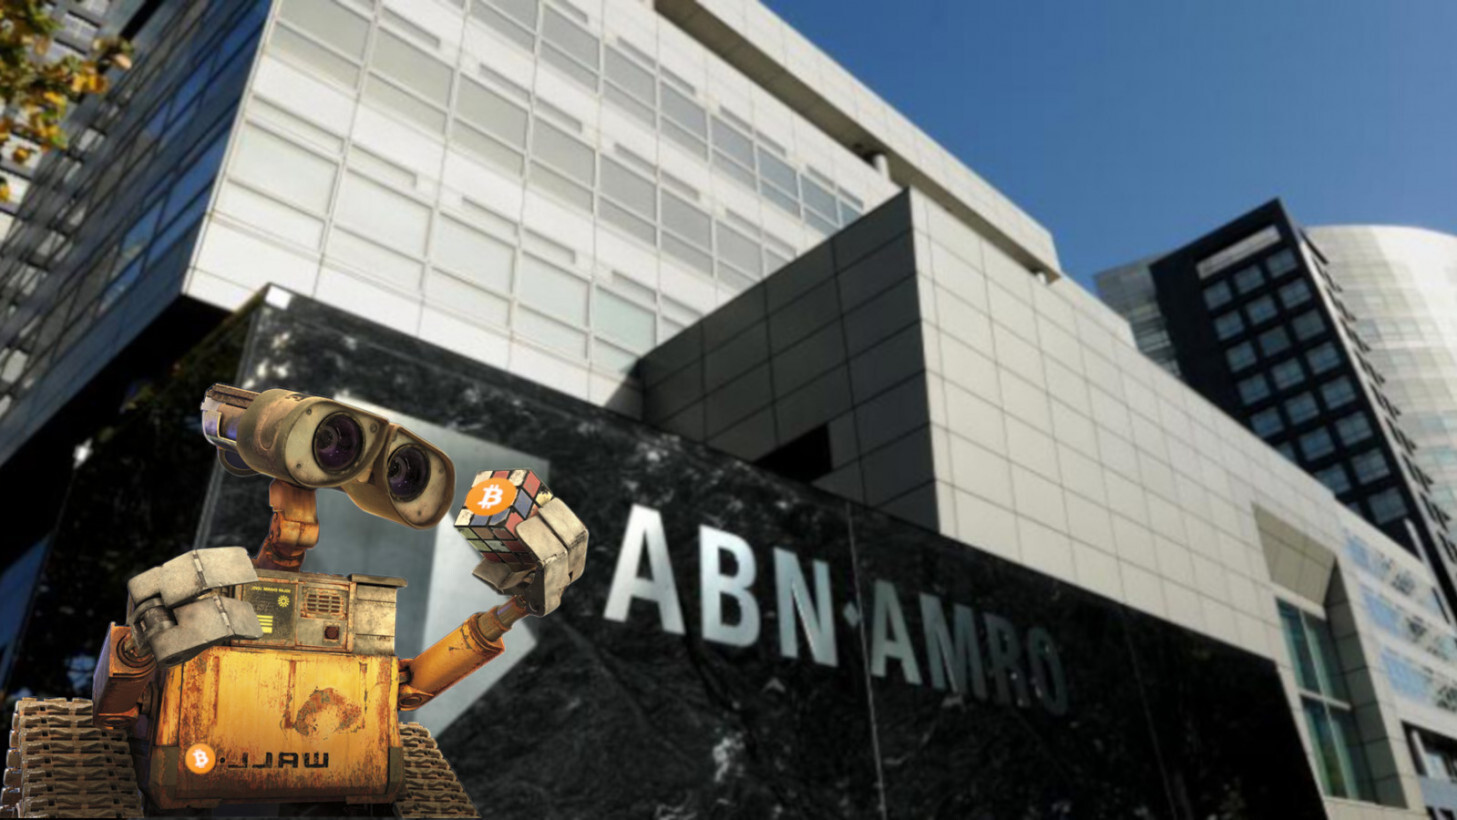 ABN AMRO isn’t making a Bitcoin wallet – but it might